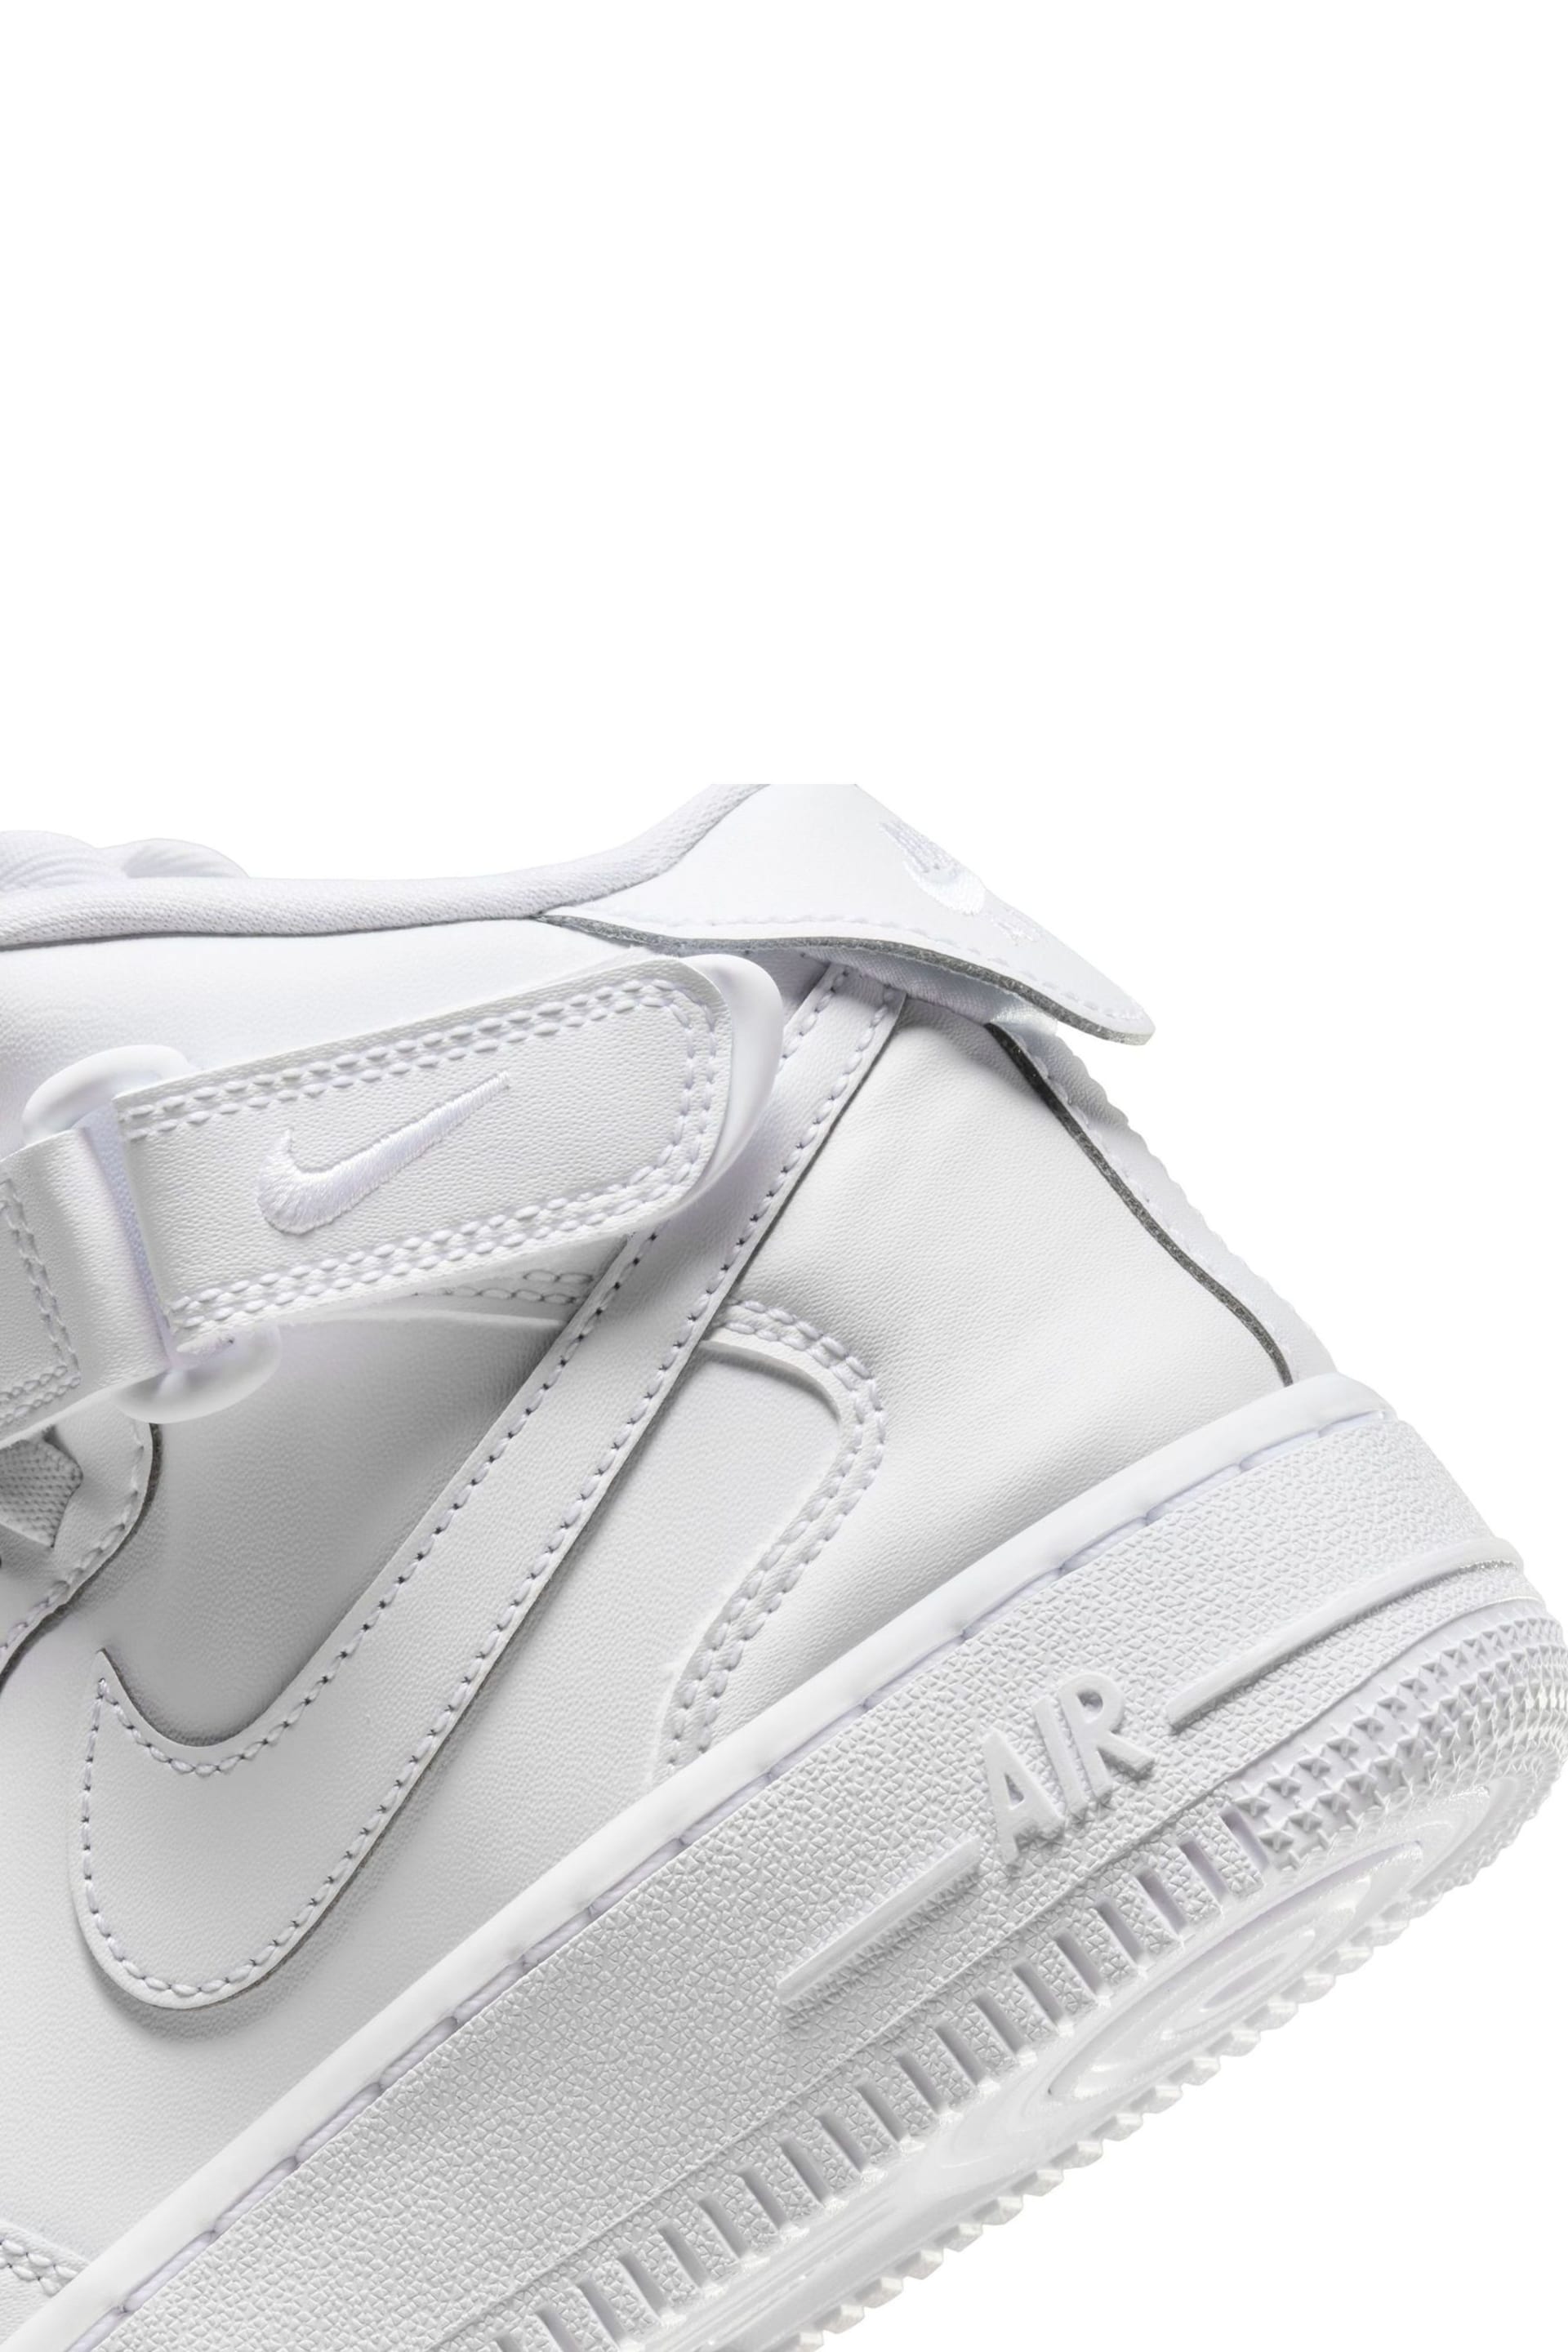 Nike White Youth Air Force 1 Mid EasyOn Trainers - Image 11 of 13